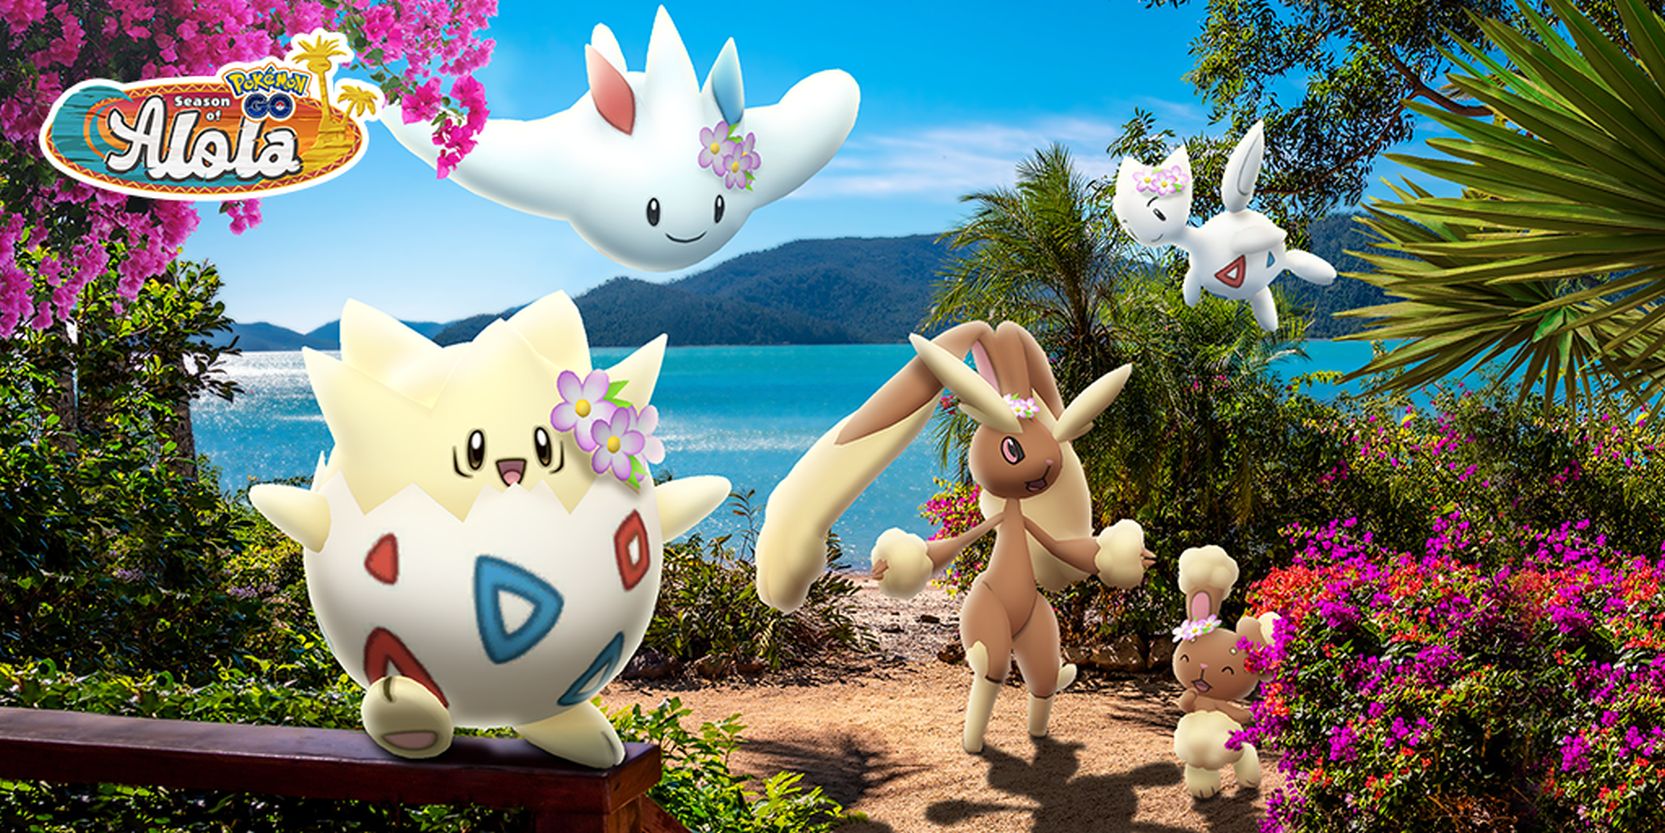 Image for Pokemon Go players can Spring into Spring from today